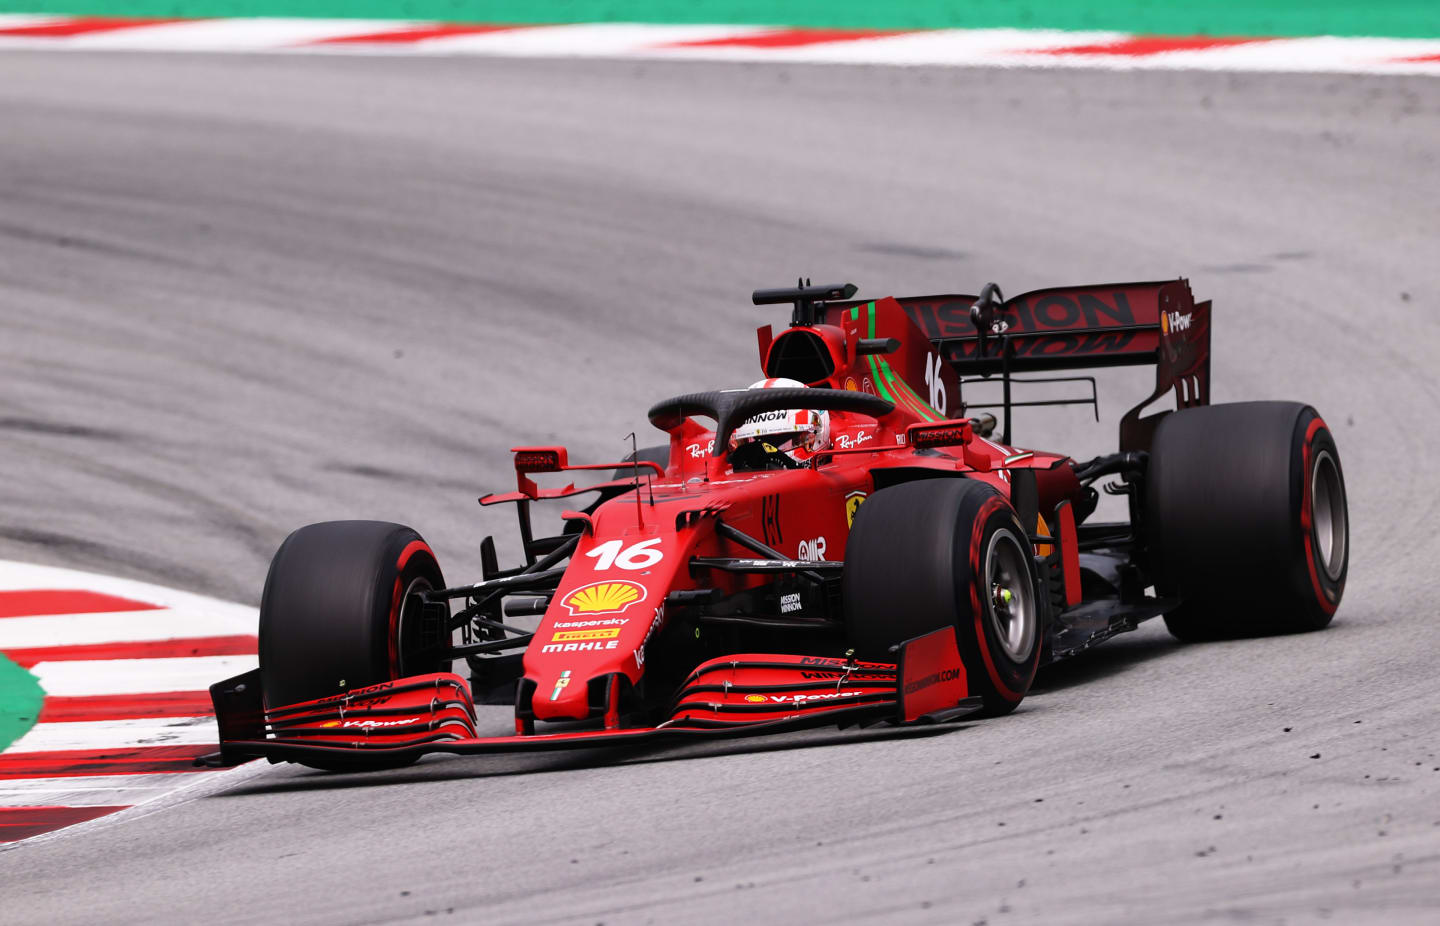 BARCELONA, SPAIN - MAY 09: Charles Leclerc of Monaco driving the (16) Scuderia Ferrari SF21 on track during the F1 Grand Prix of Spain at Circuit de Barcelona-Catalunya on May 09, 2021 in Barcelona, Spain. (Photo by Lars Baron/Getty Images)